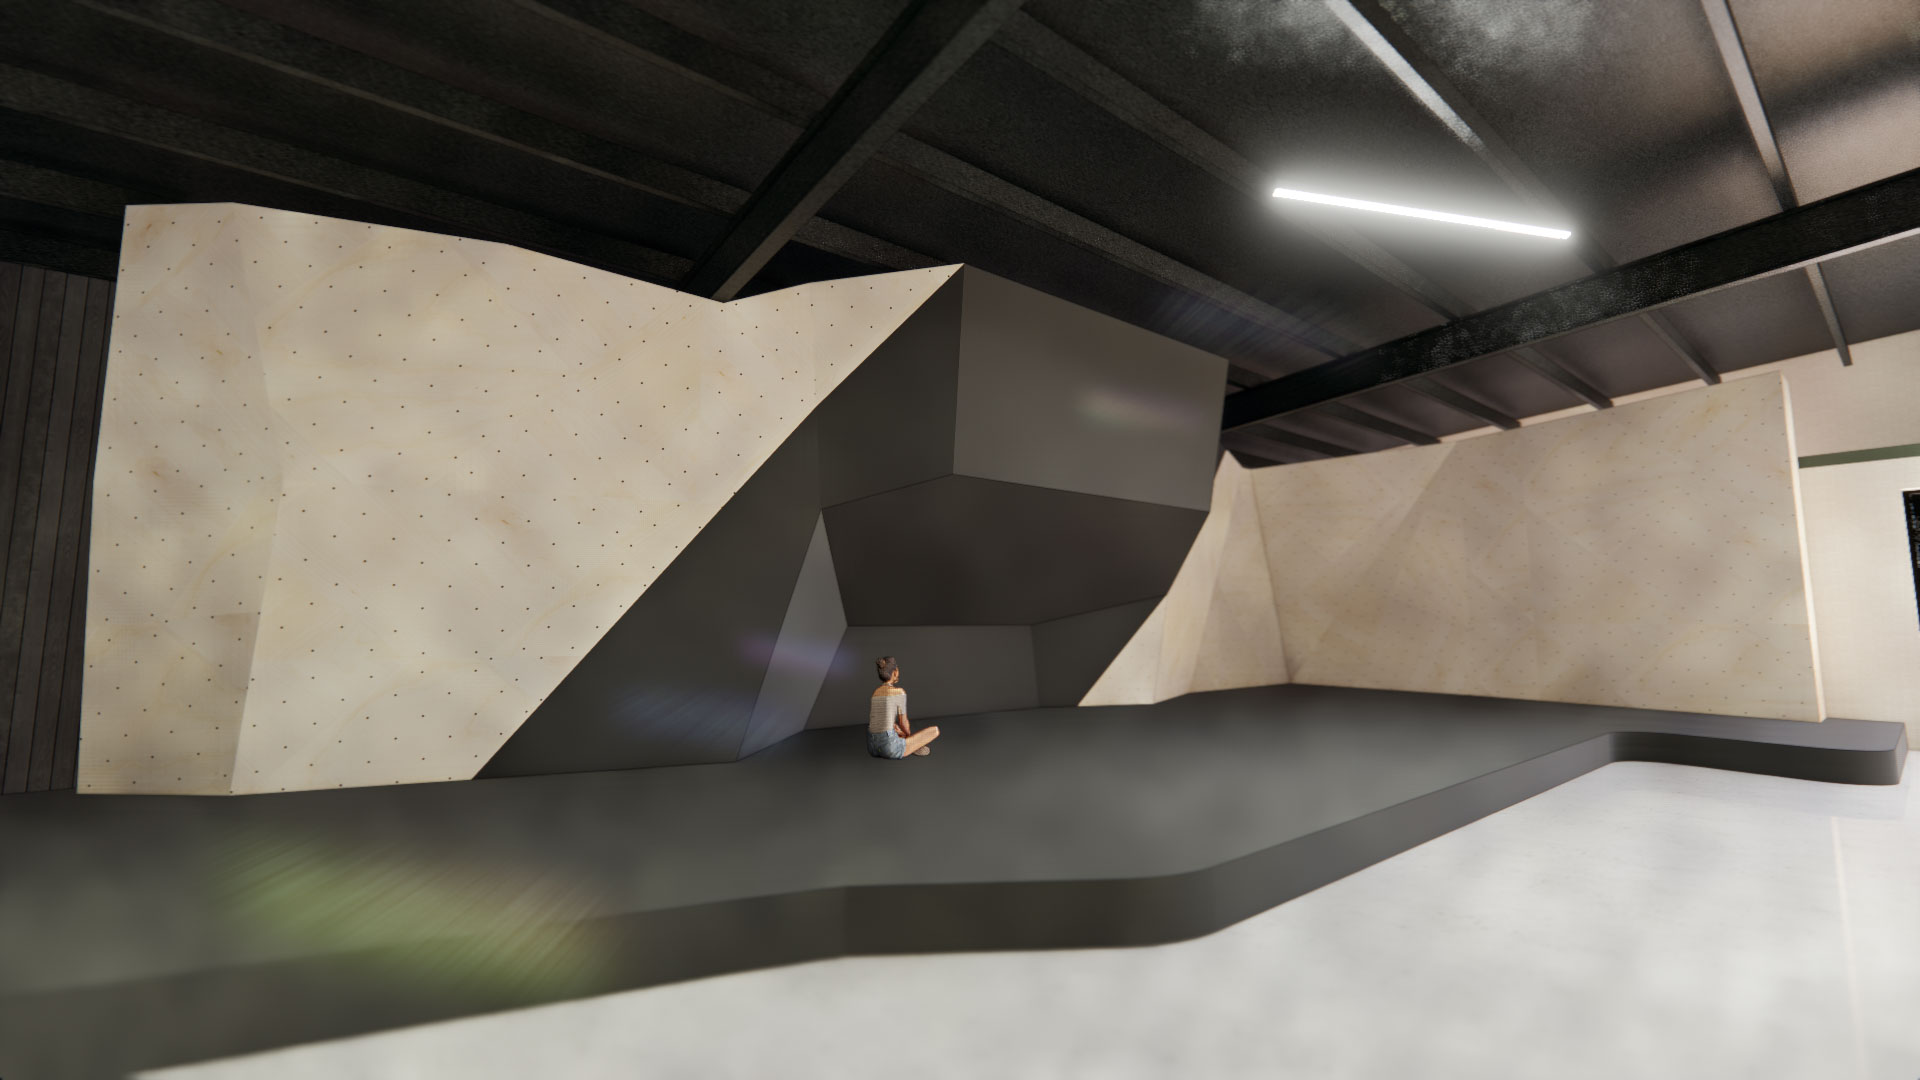 Rendering of the climbing walls